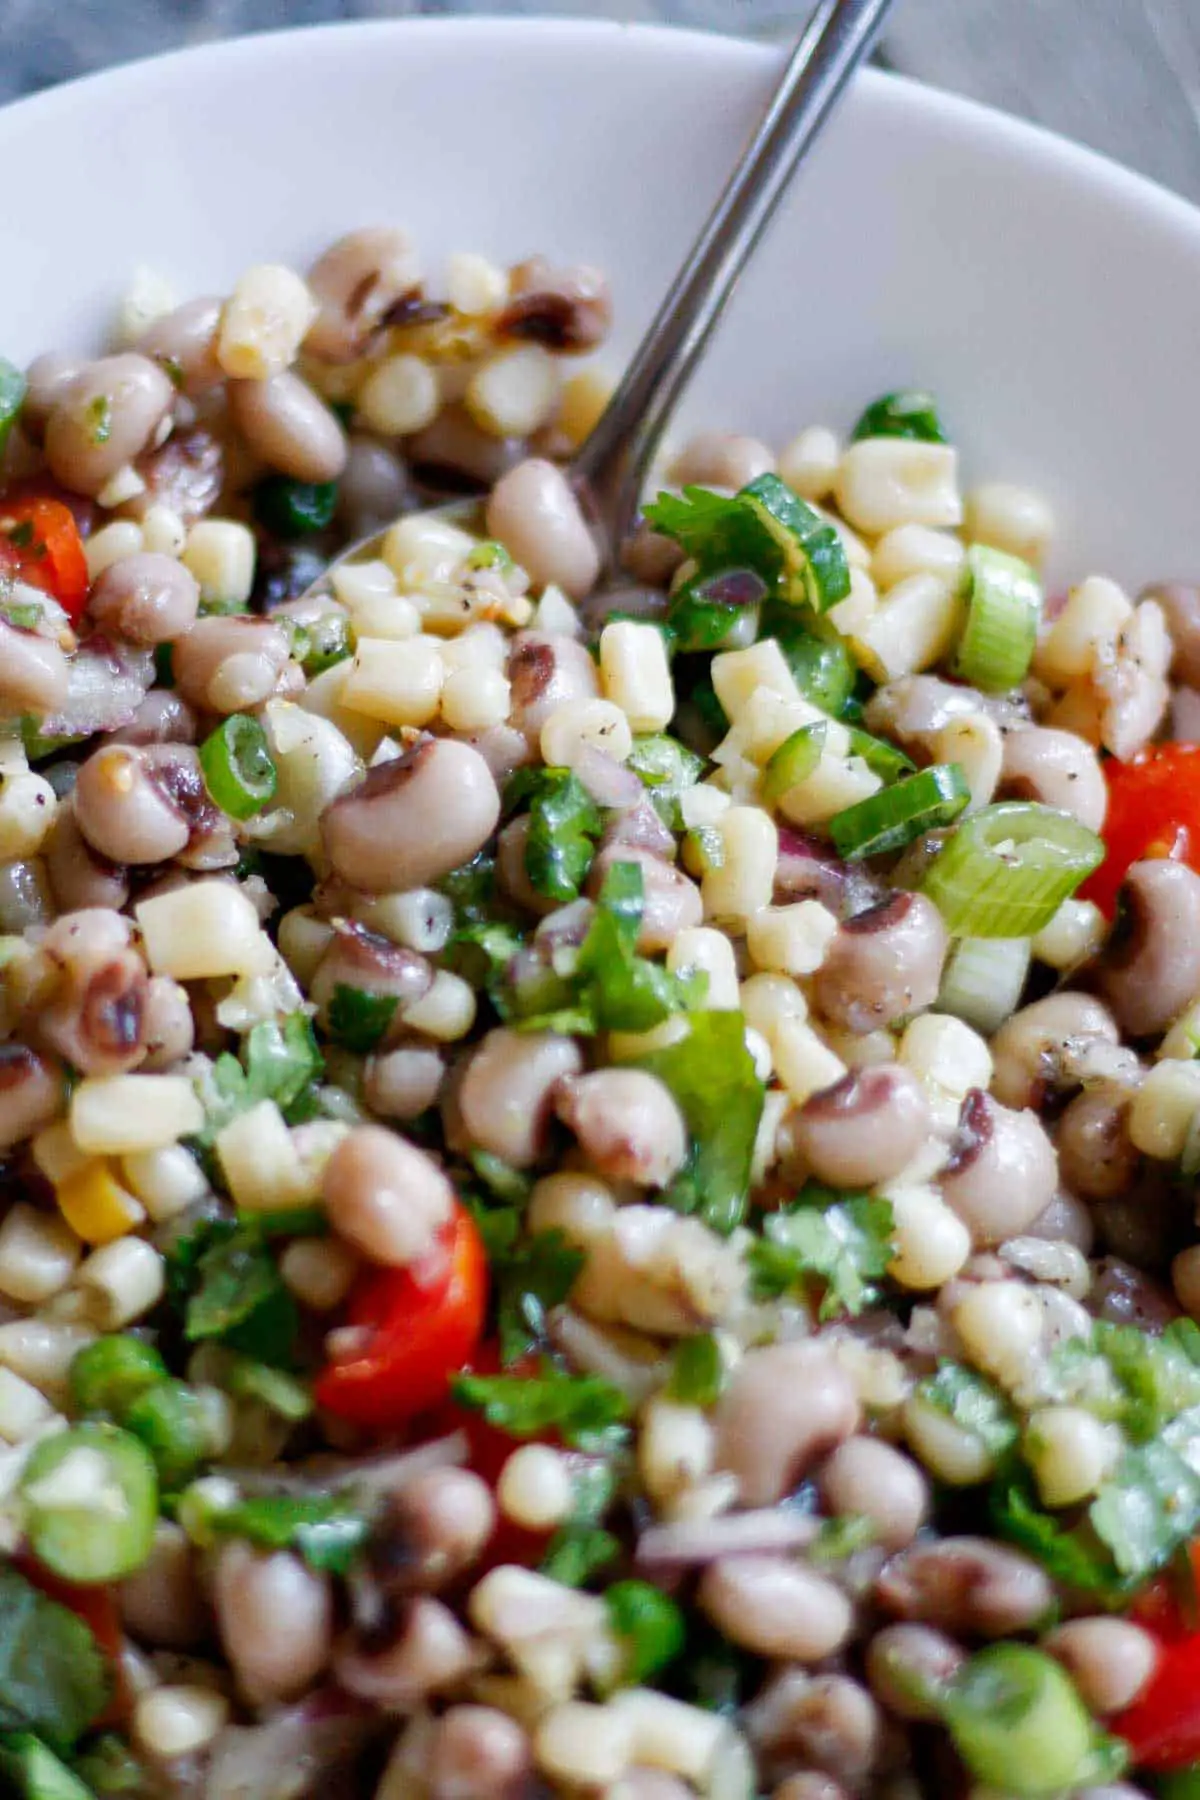 Texas caviar which is a mixture of shoepeg corn, black eyed peas, green onions, cilantro, grape tomatoes, and minced garlic, onion, and jalapeno pepper. The Texas caviar is in a white bowl and there is a spoon in the bowl.